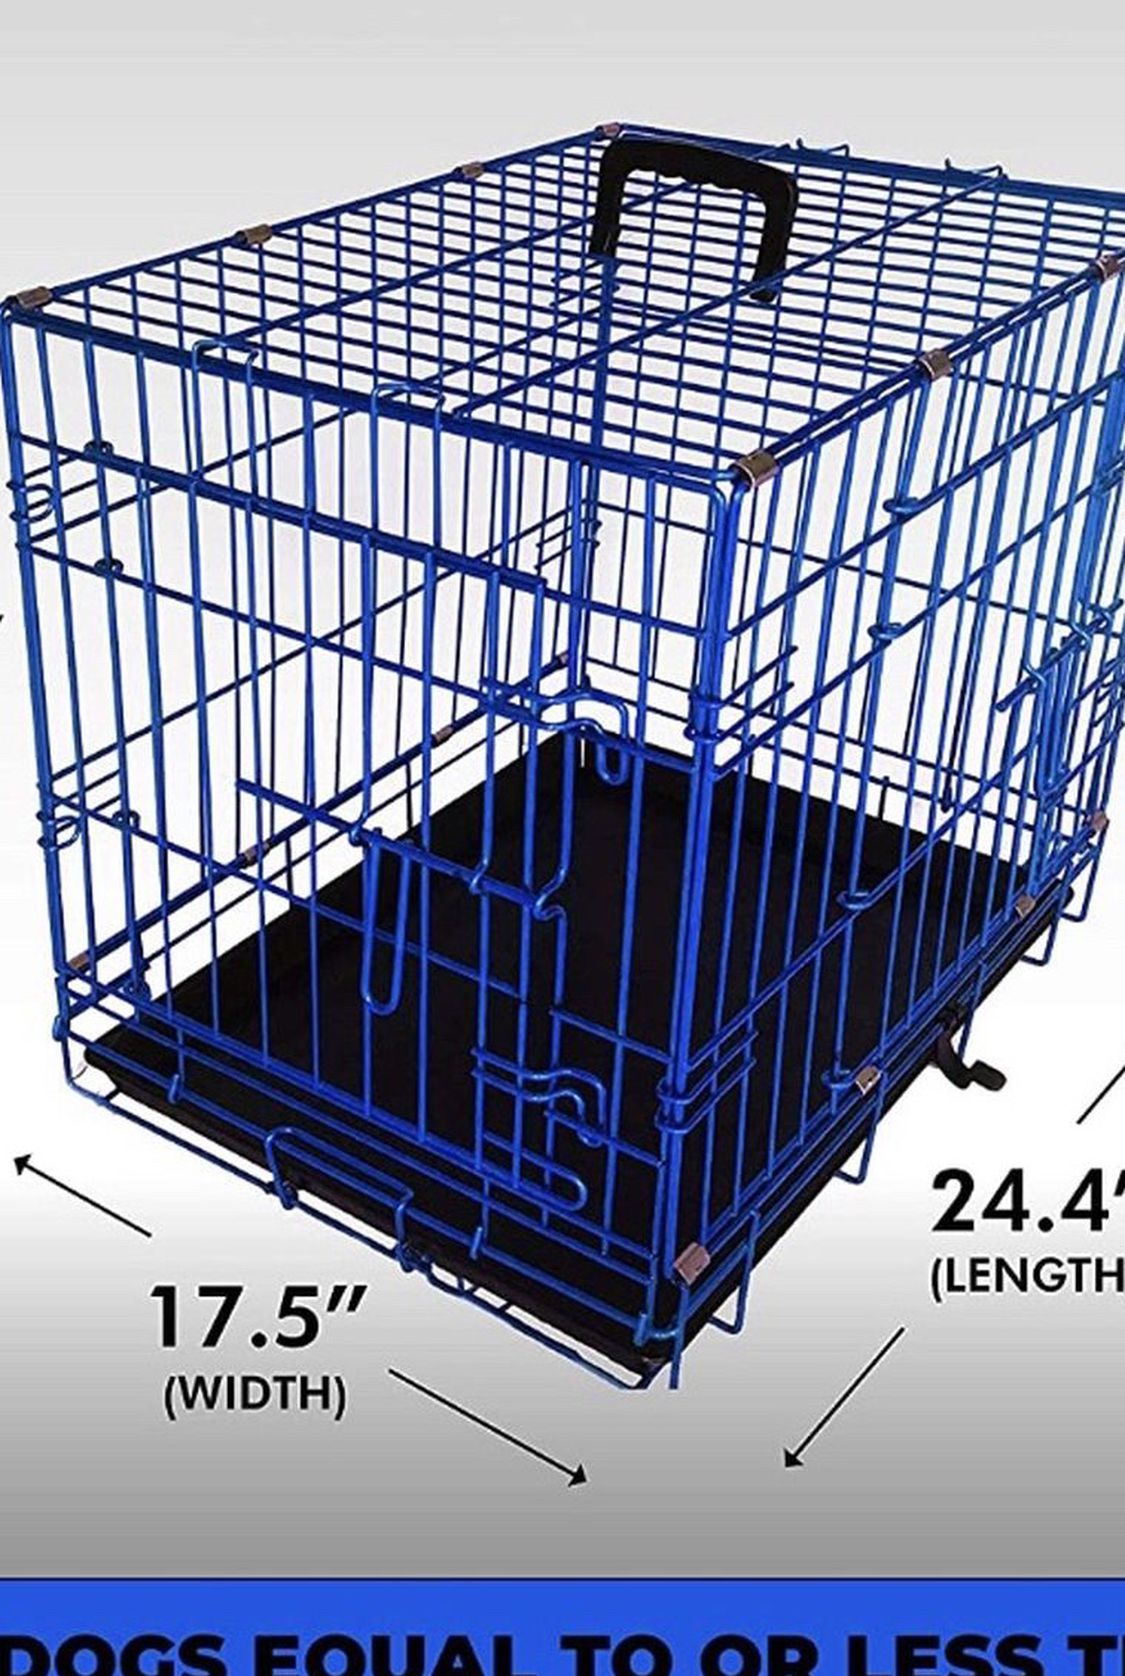 Foldable Dog Crate With 2 Doors - Blue Color